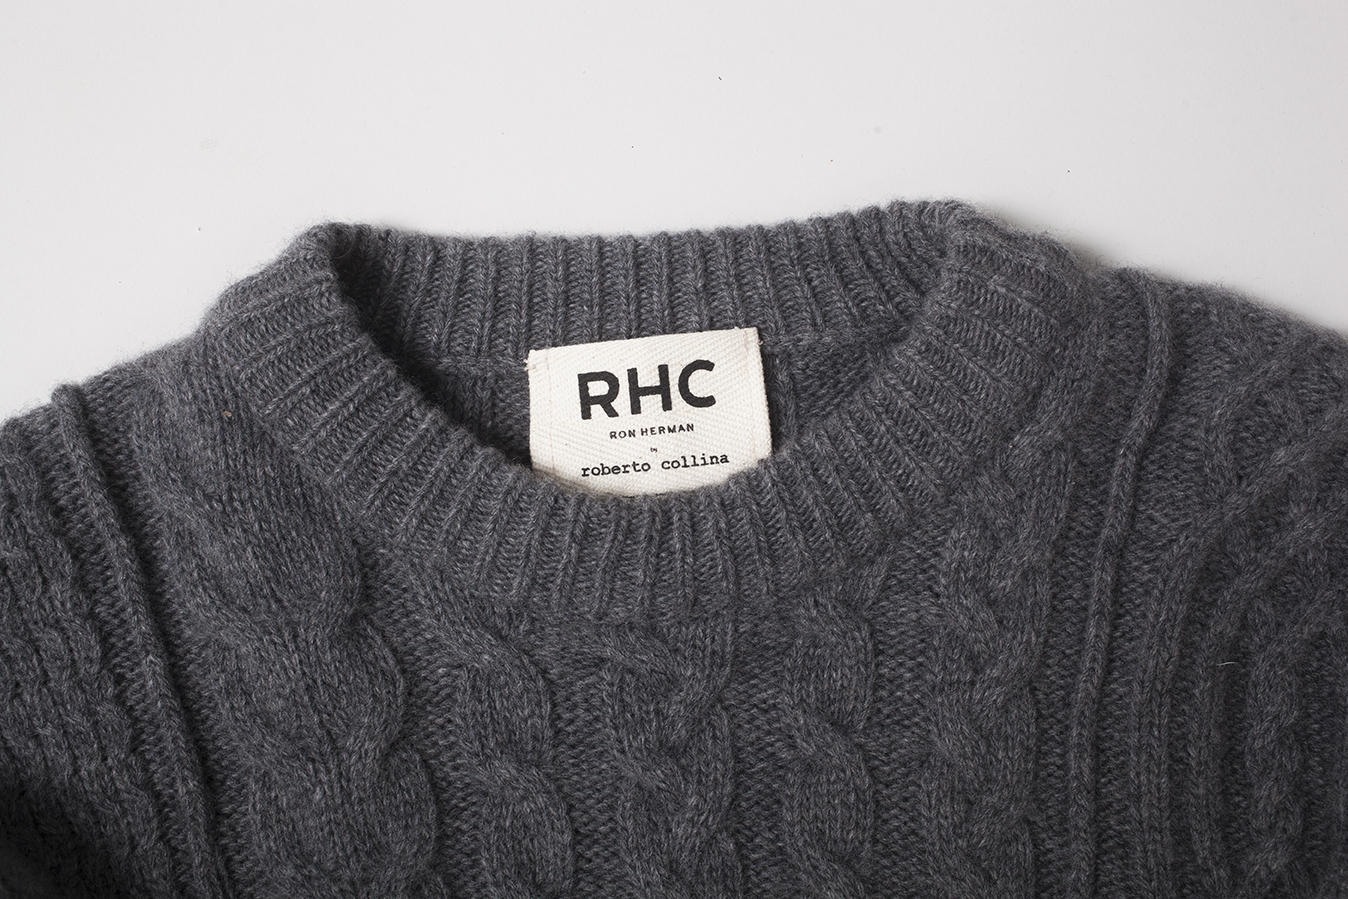 RHC by roberto collina
Cable Crew Kneck Knit&Silk Nep Crew Knit